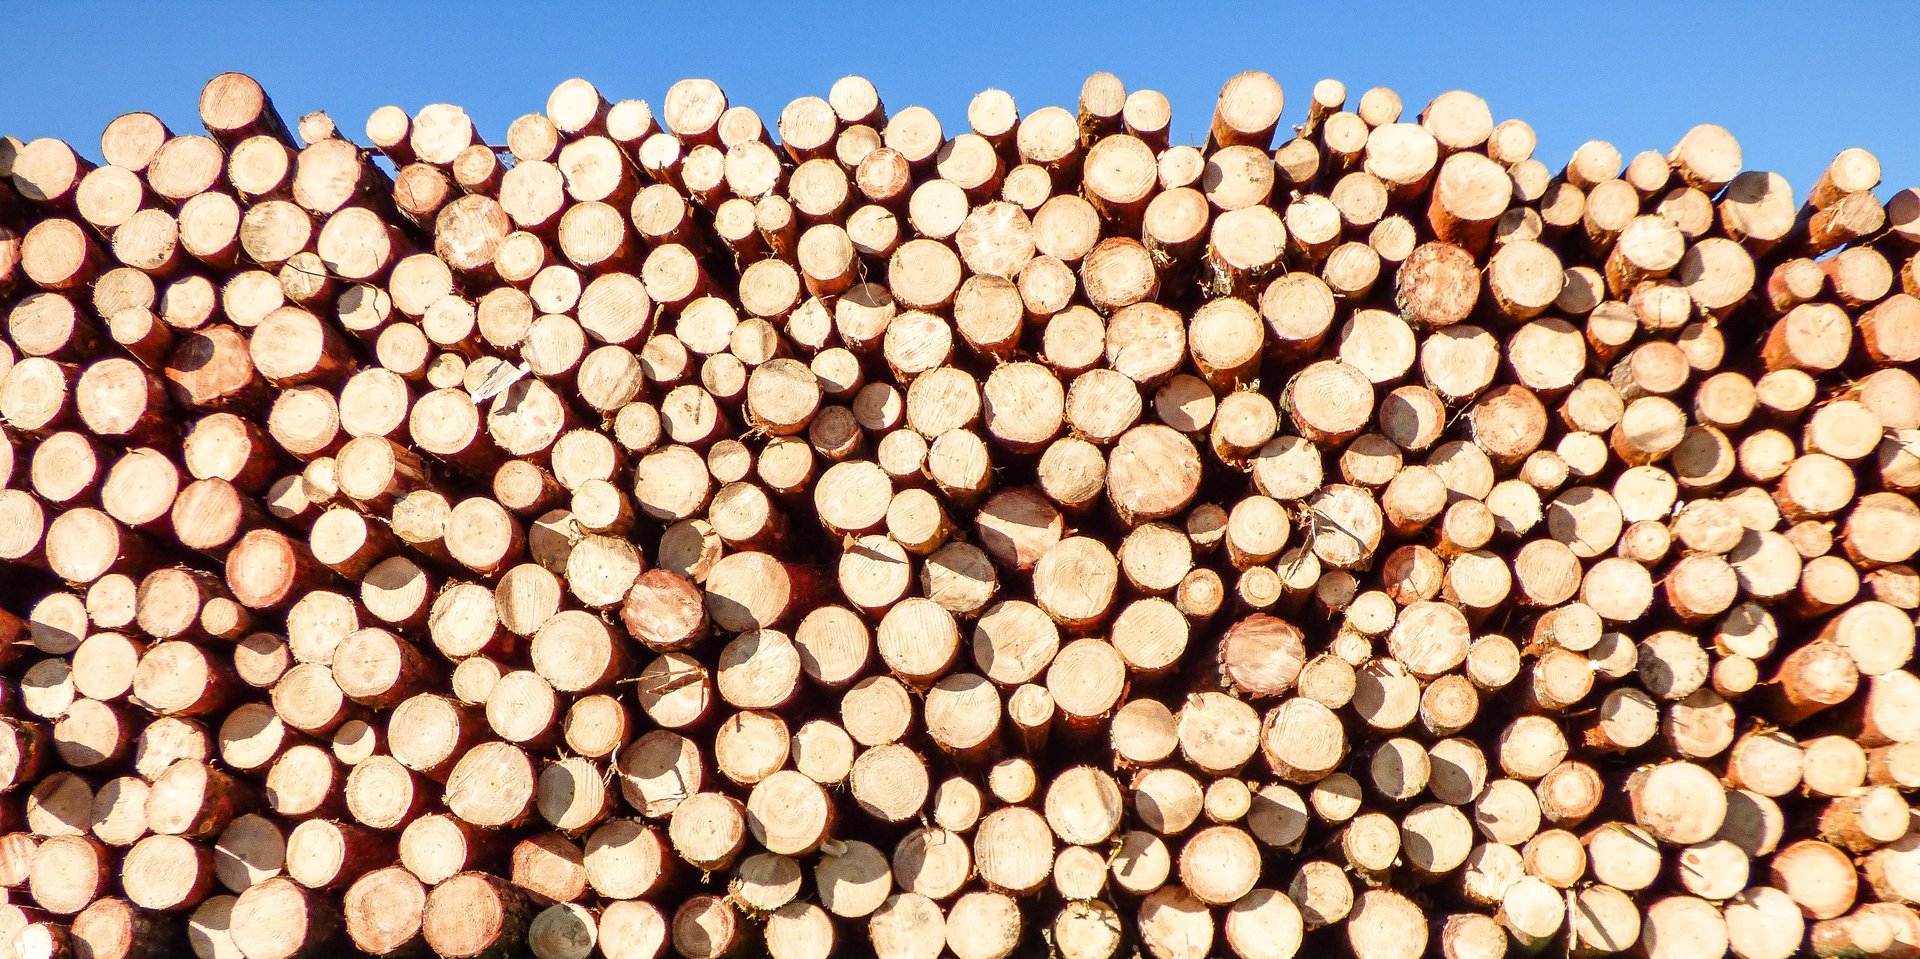 large amount of recently cut logs piled neatly on top of each other under a blue sky